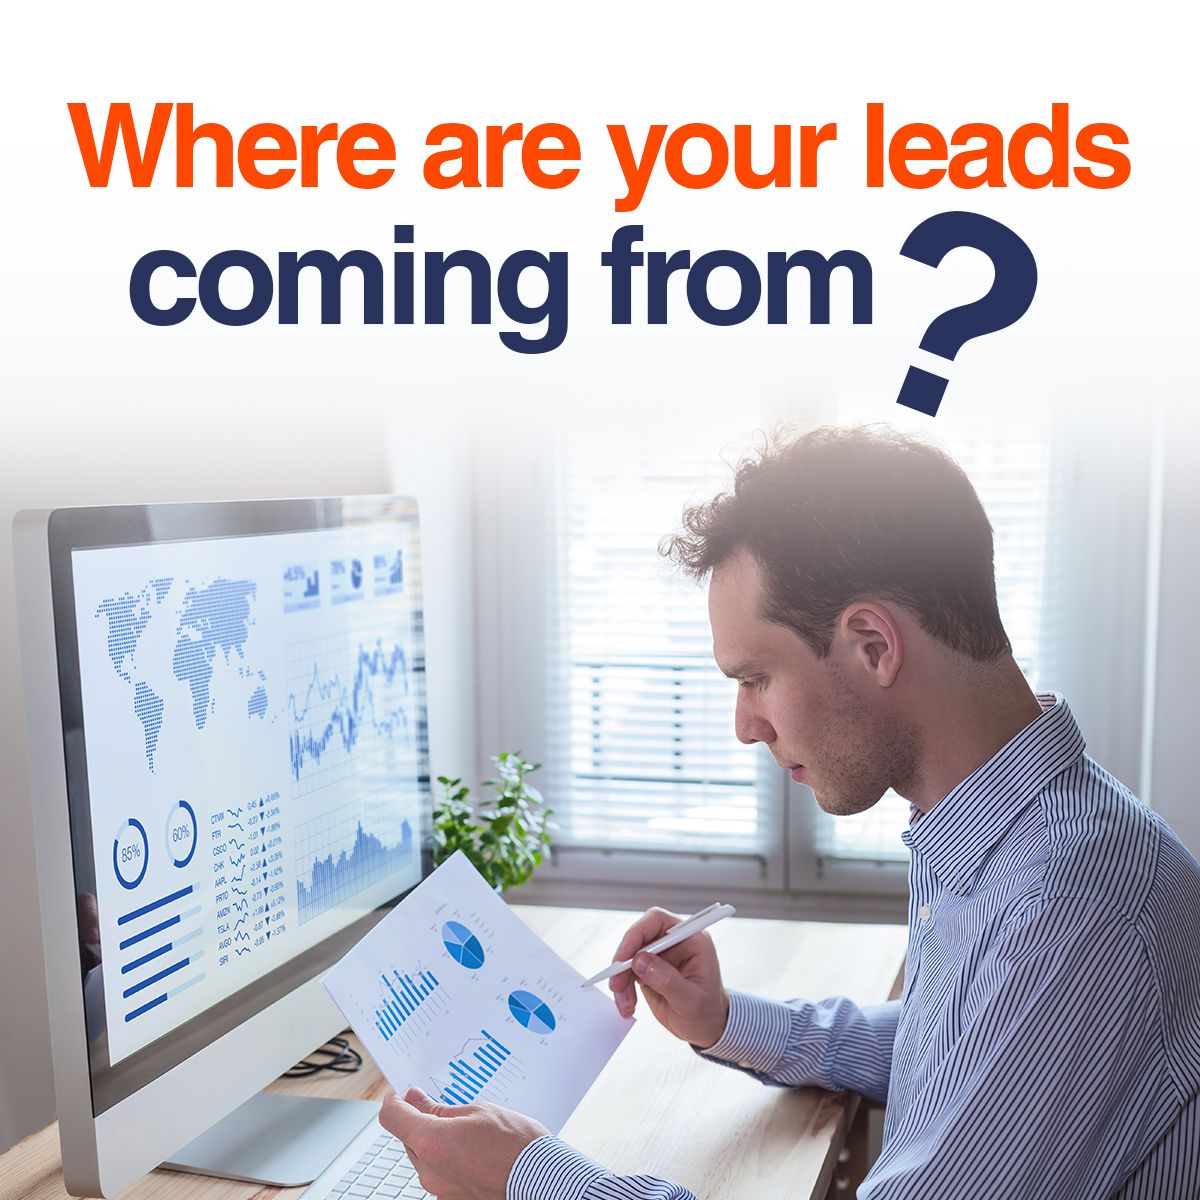 Where are your leads coming from?